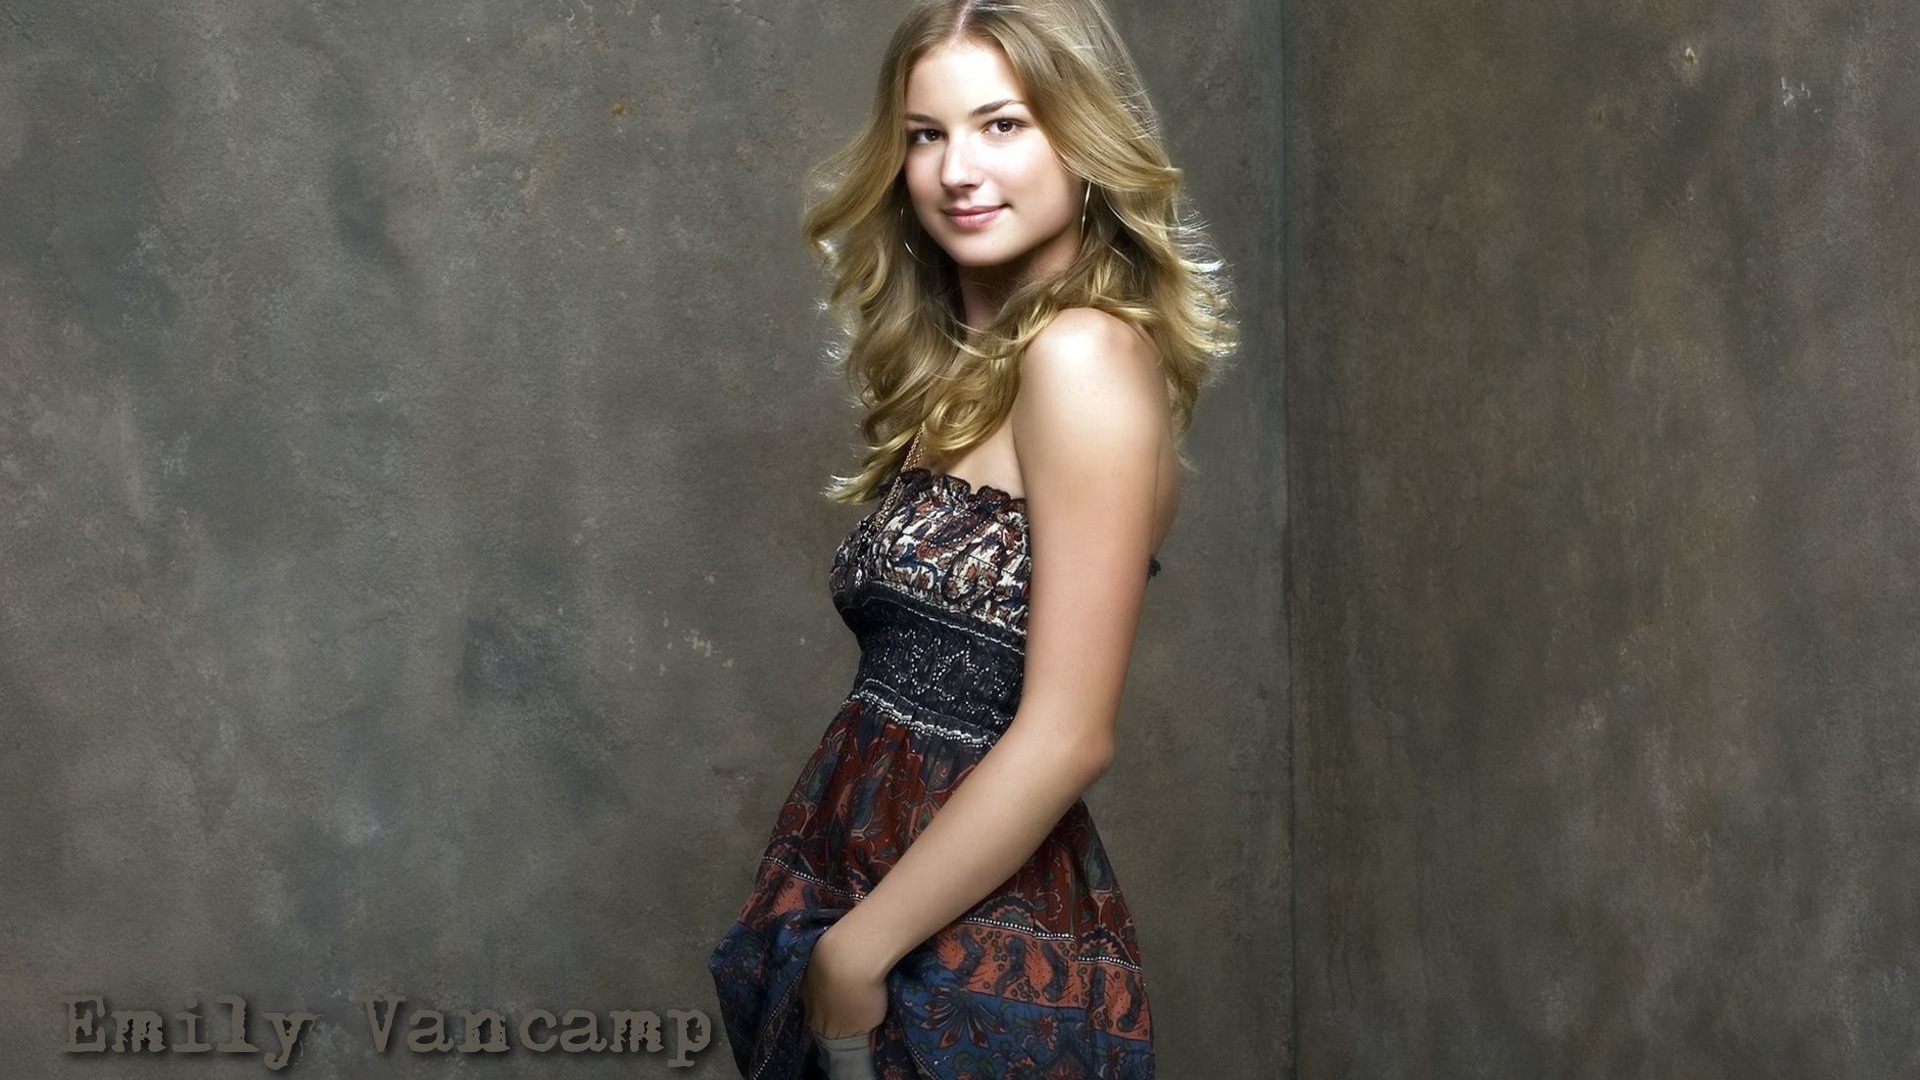 Emily VanCamp #007 - 1920x1080 Wallpapers Pictures Photos Images